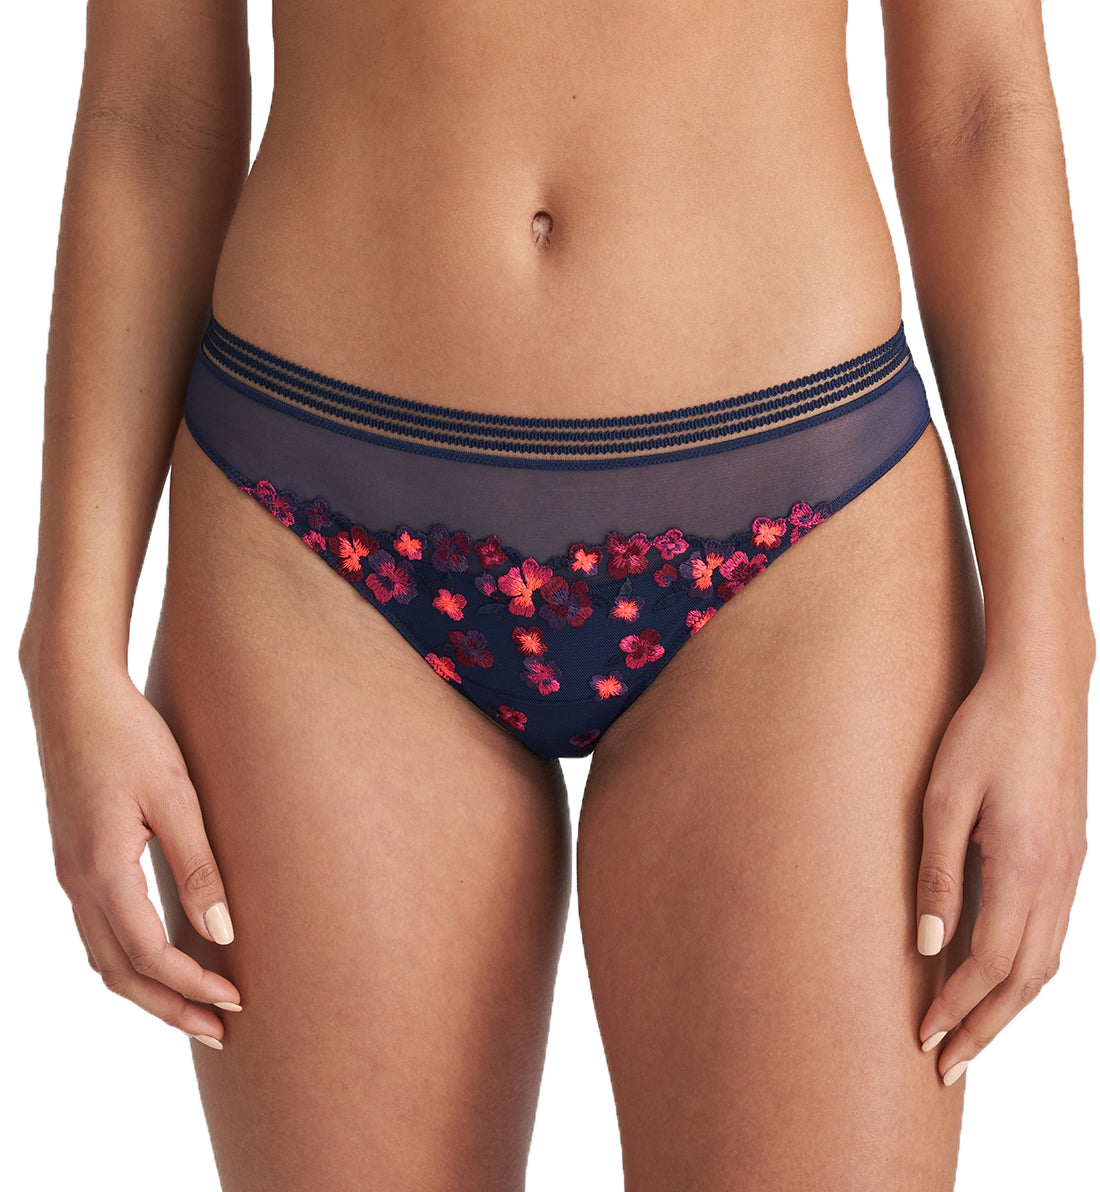 Marie Jo Nathy Matching Rio Brief (0502480),XS,Water Blue - Water Blue,XS